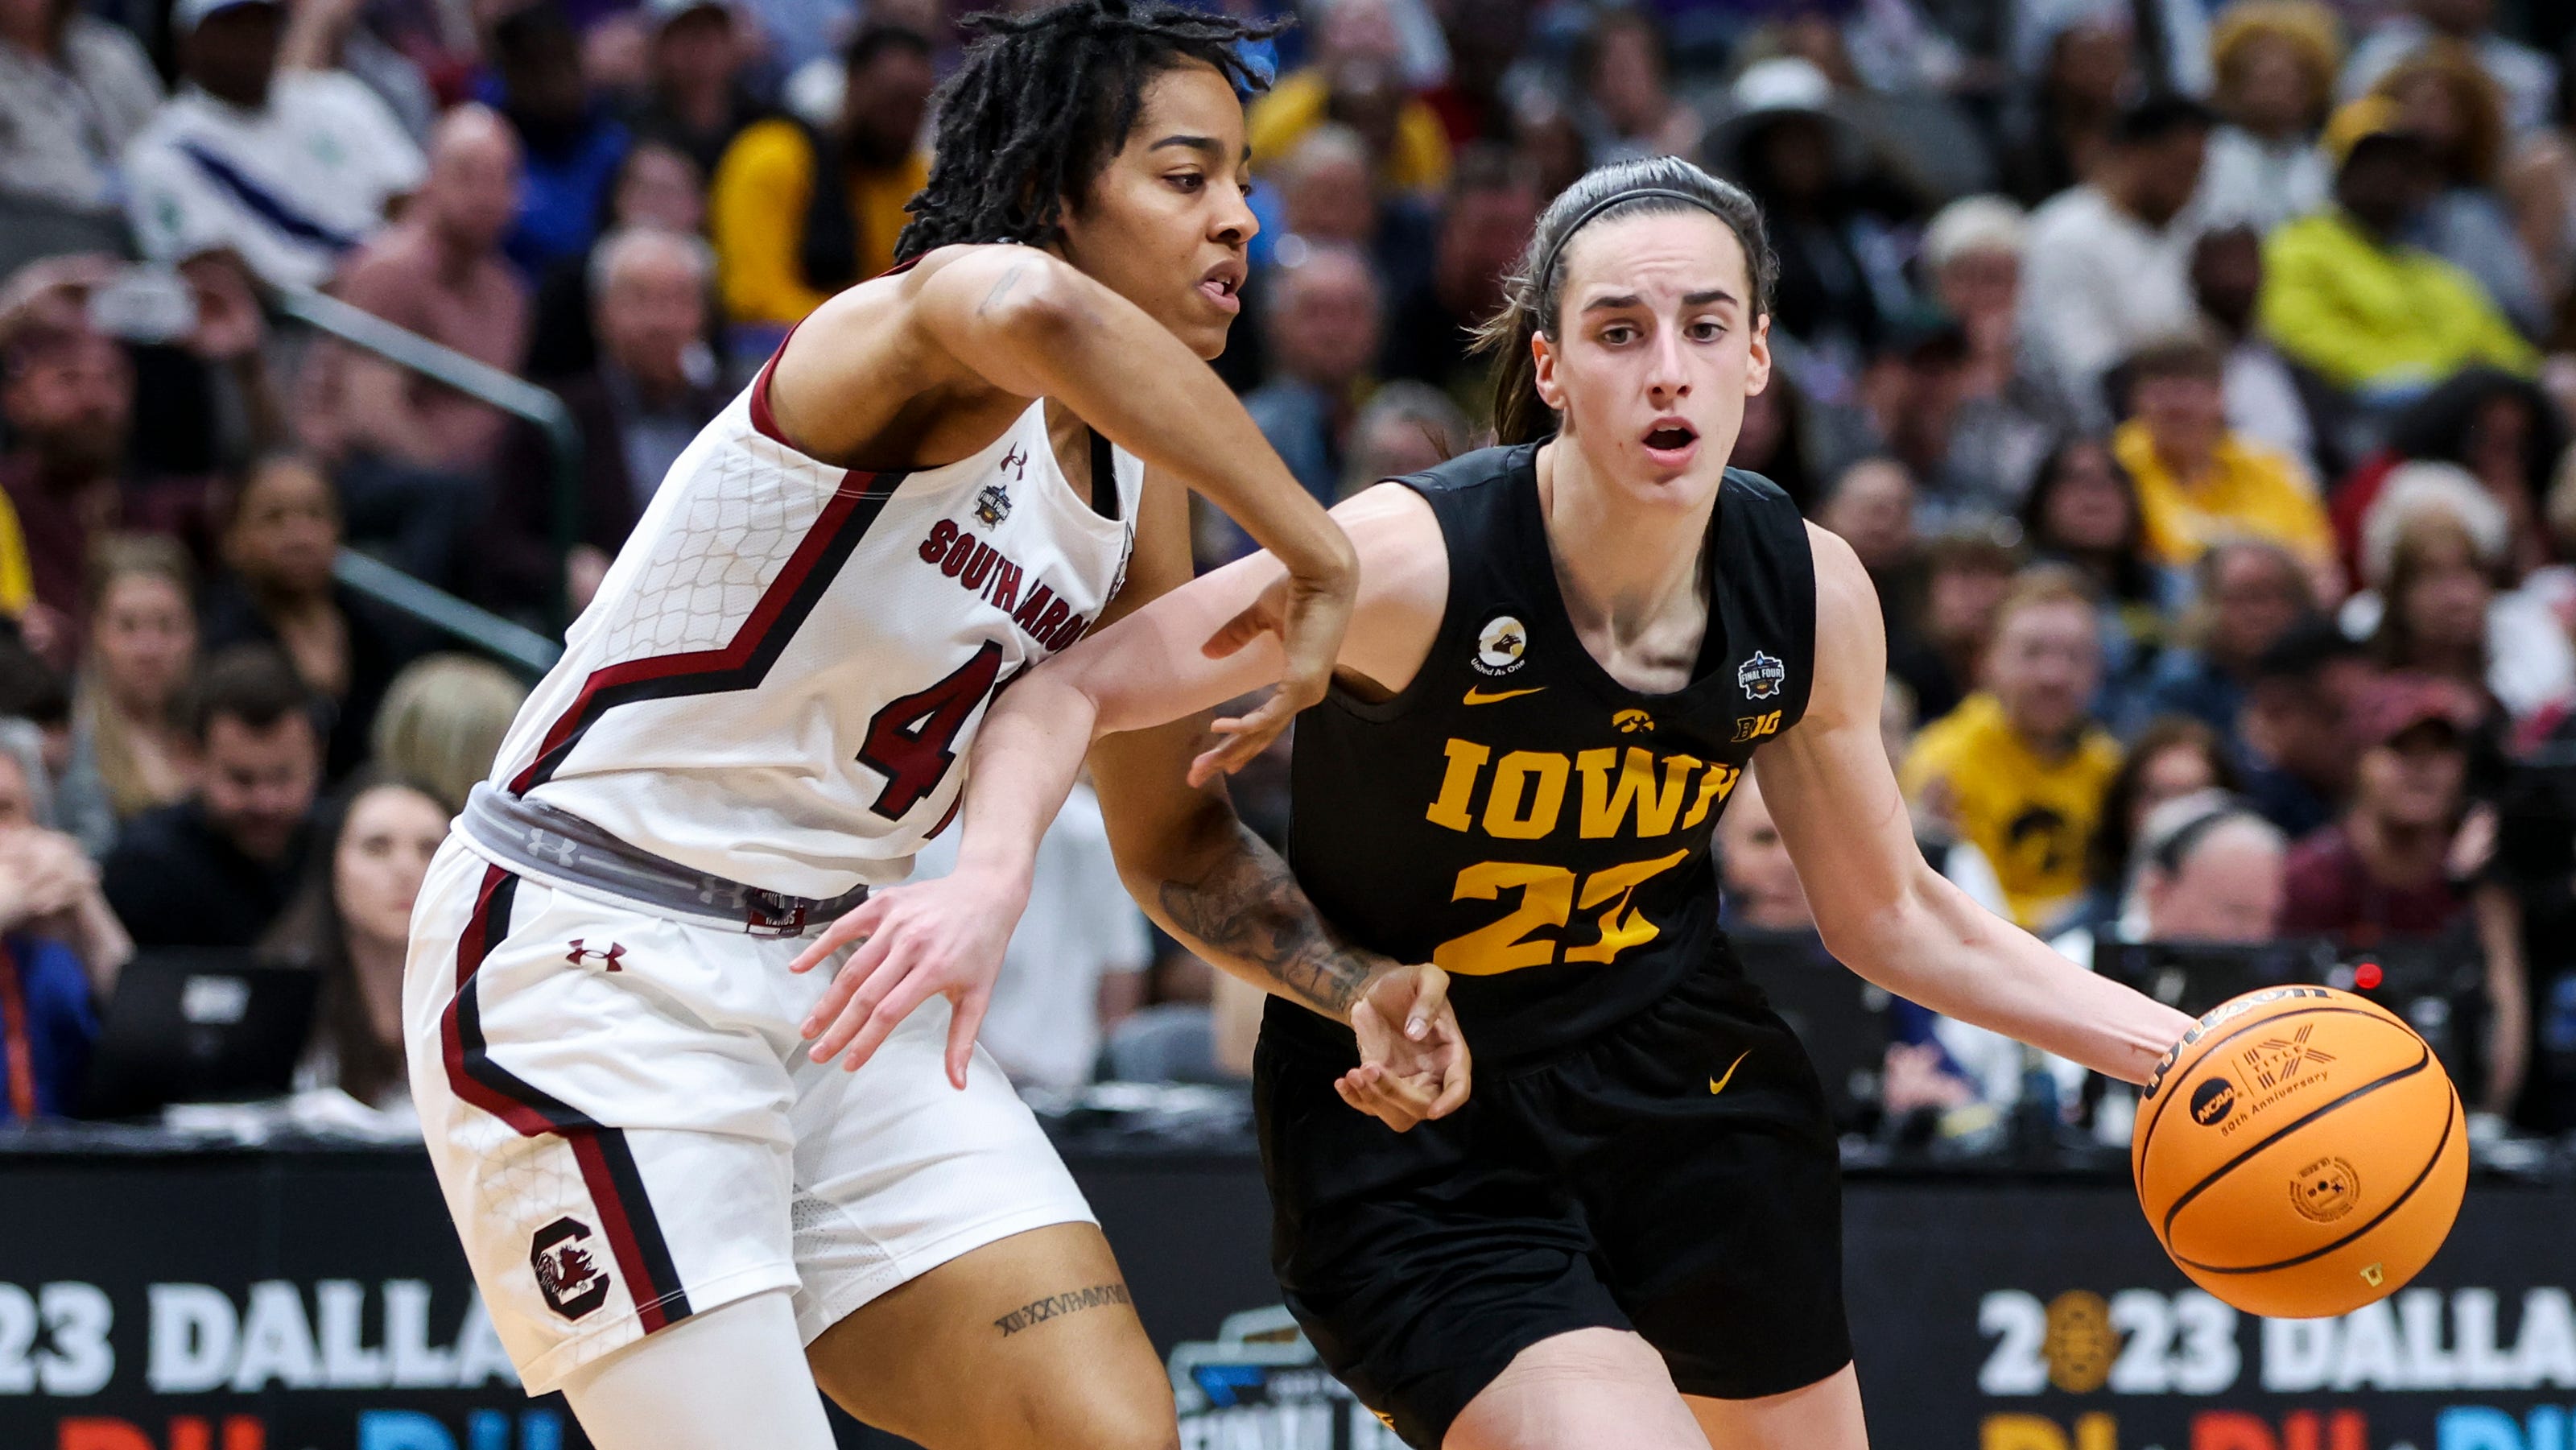 Caitlin Clark steals the show and Iowa stuns South Carolina 77-73 in women's Final Four